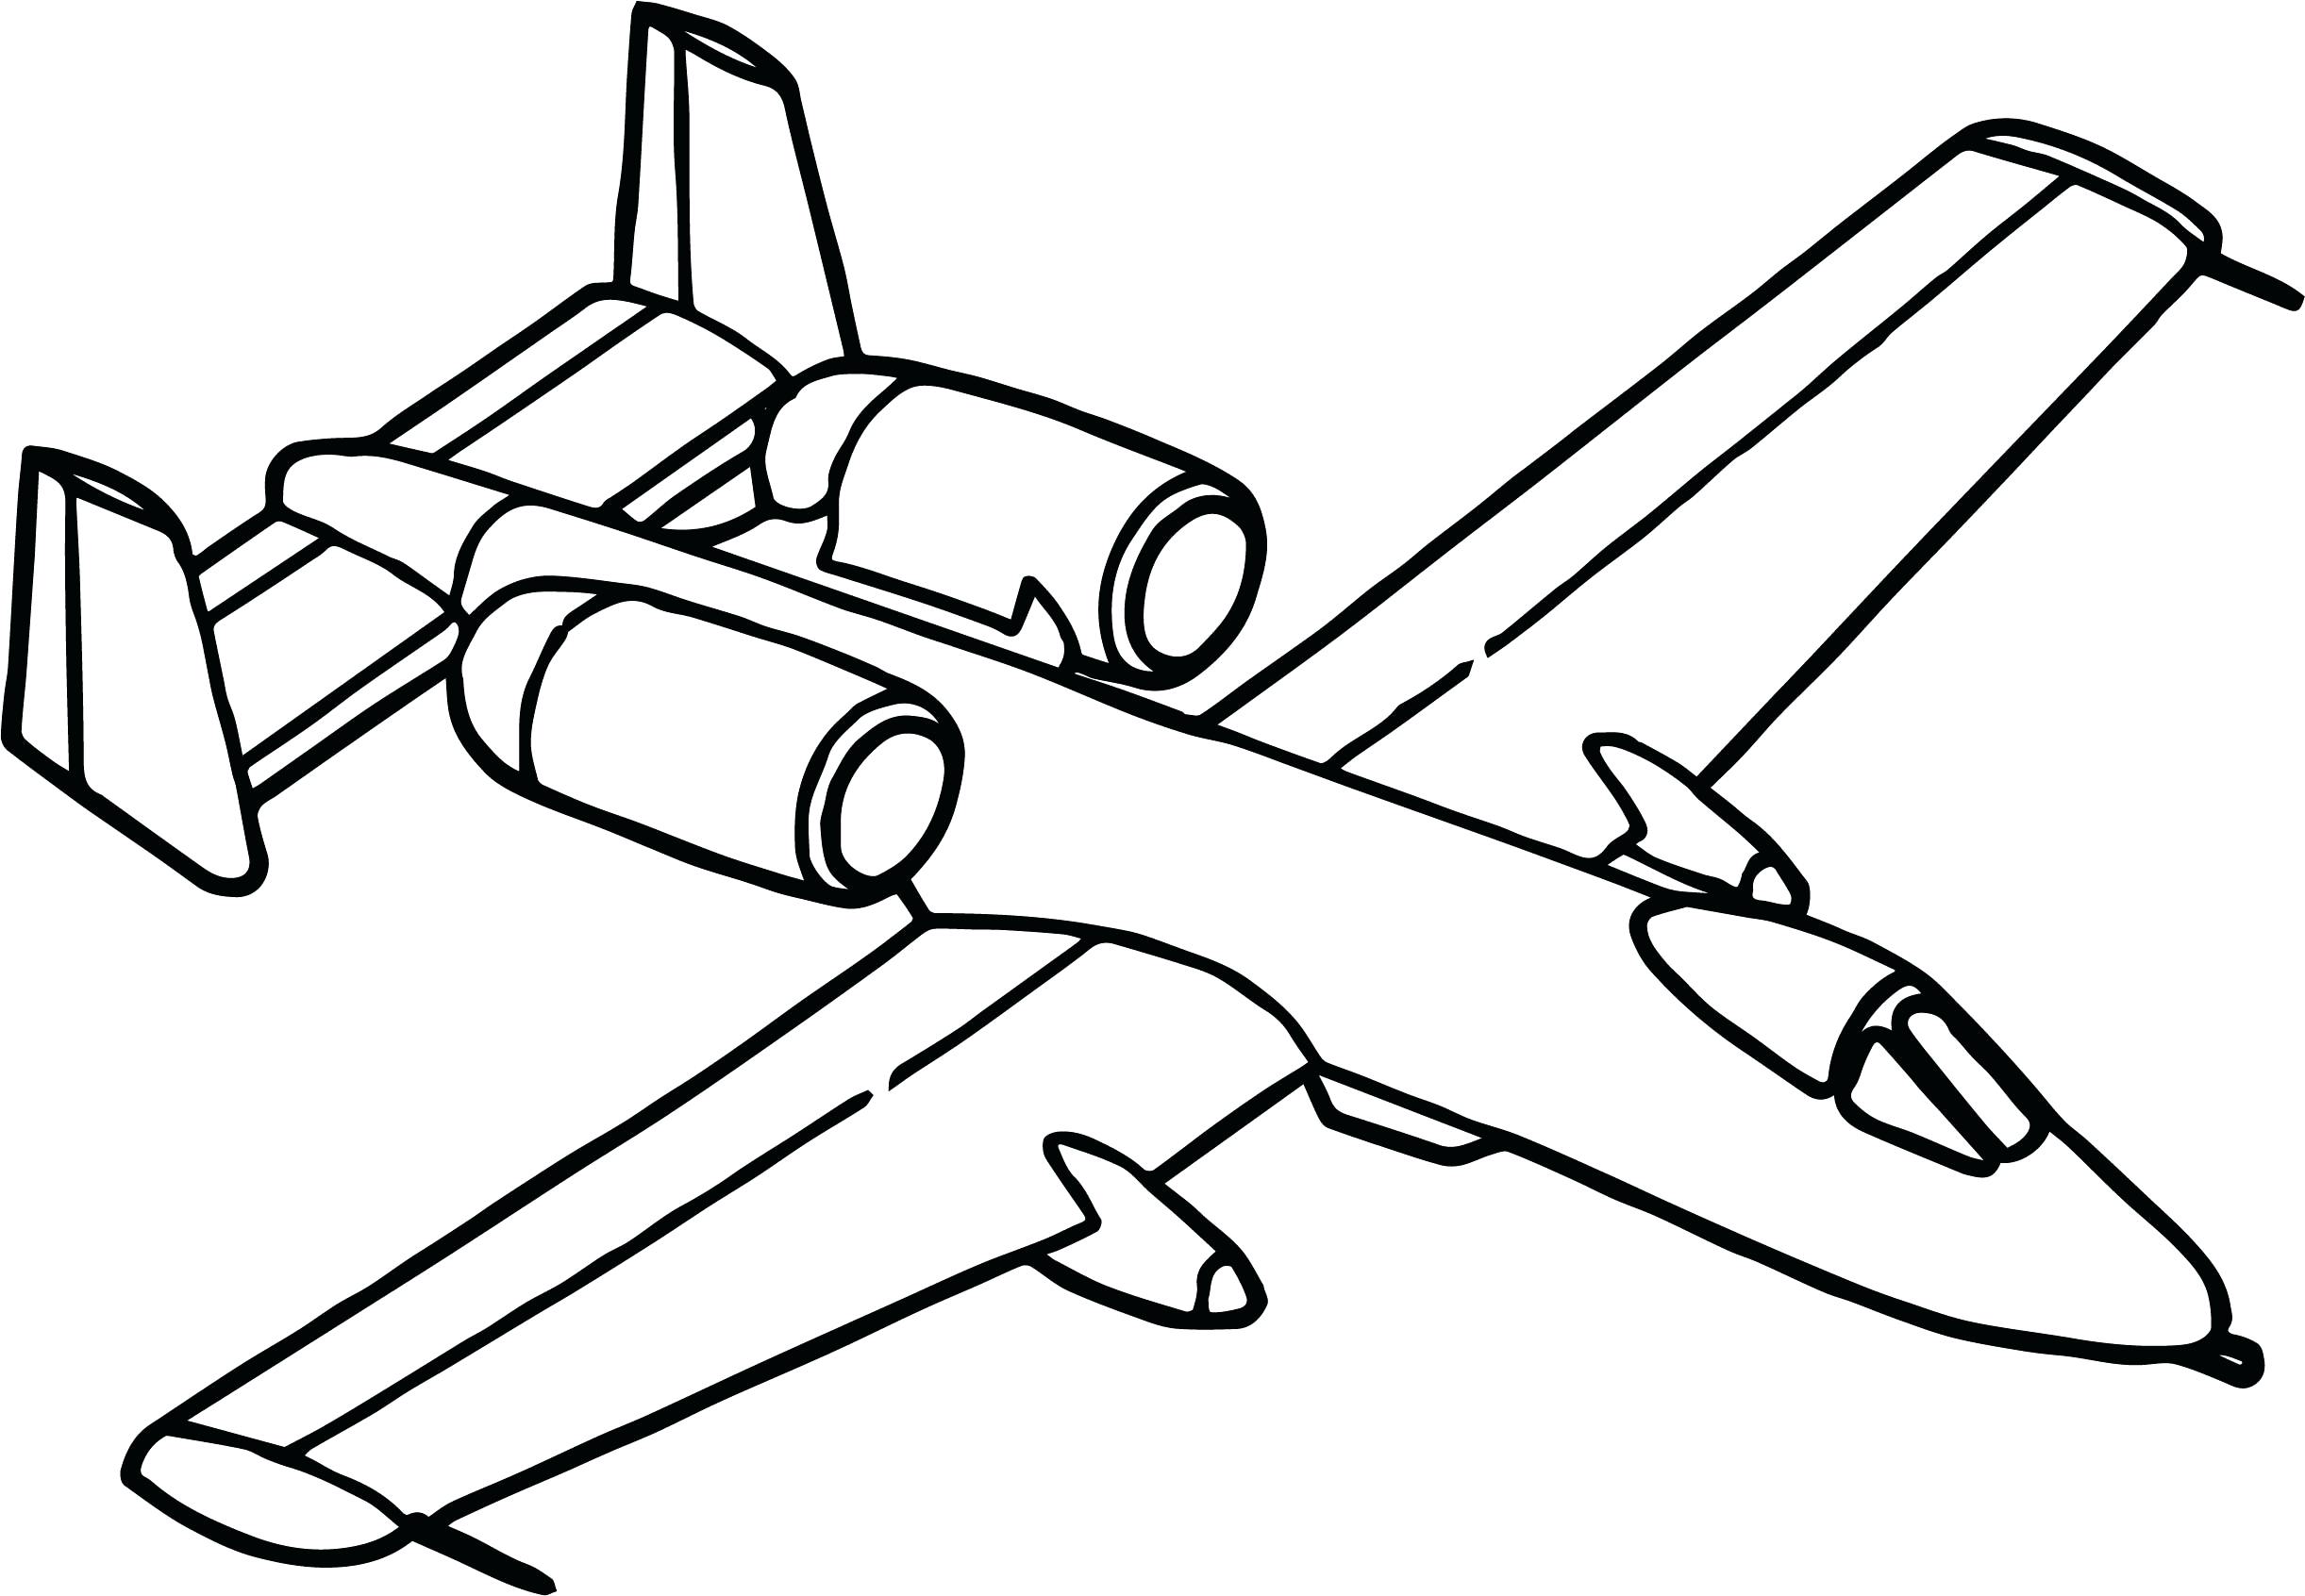 coloring-picture-of-an-airplane-free-printable-airplane-coloring-pages